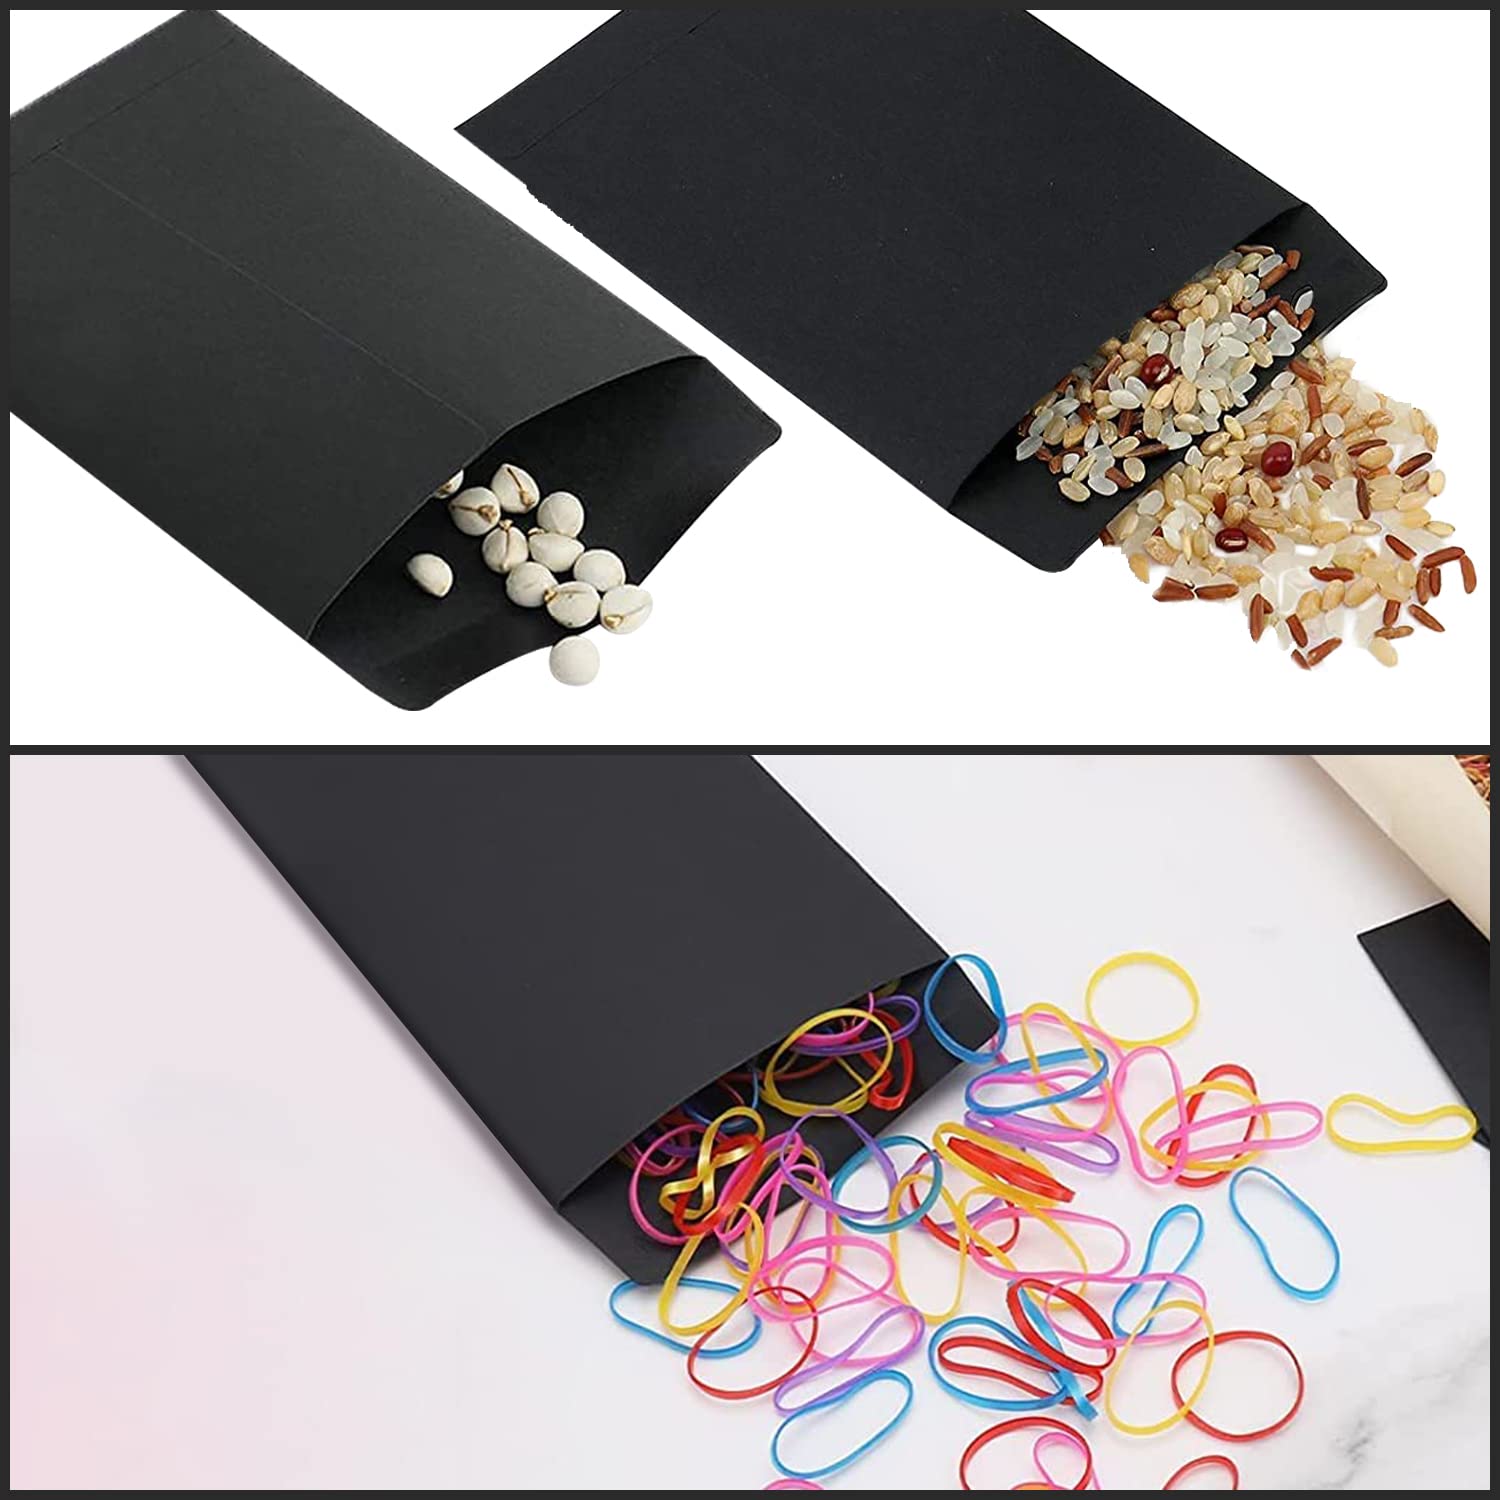 100Pcs Small Black Envelopes, Self-Adhesive Seed Envelopes Seed Packets Kraft Paper Coin Envelopes Money Envelopes for Wages, Seeds, Coins, Beads or Stamps(10x6cm/3.9x2.4inch)